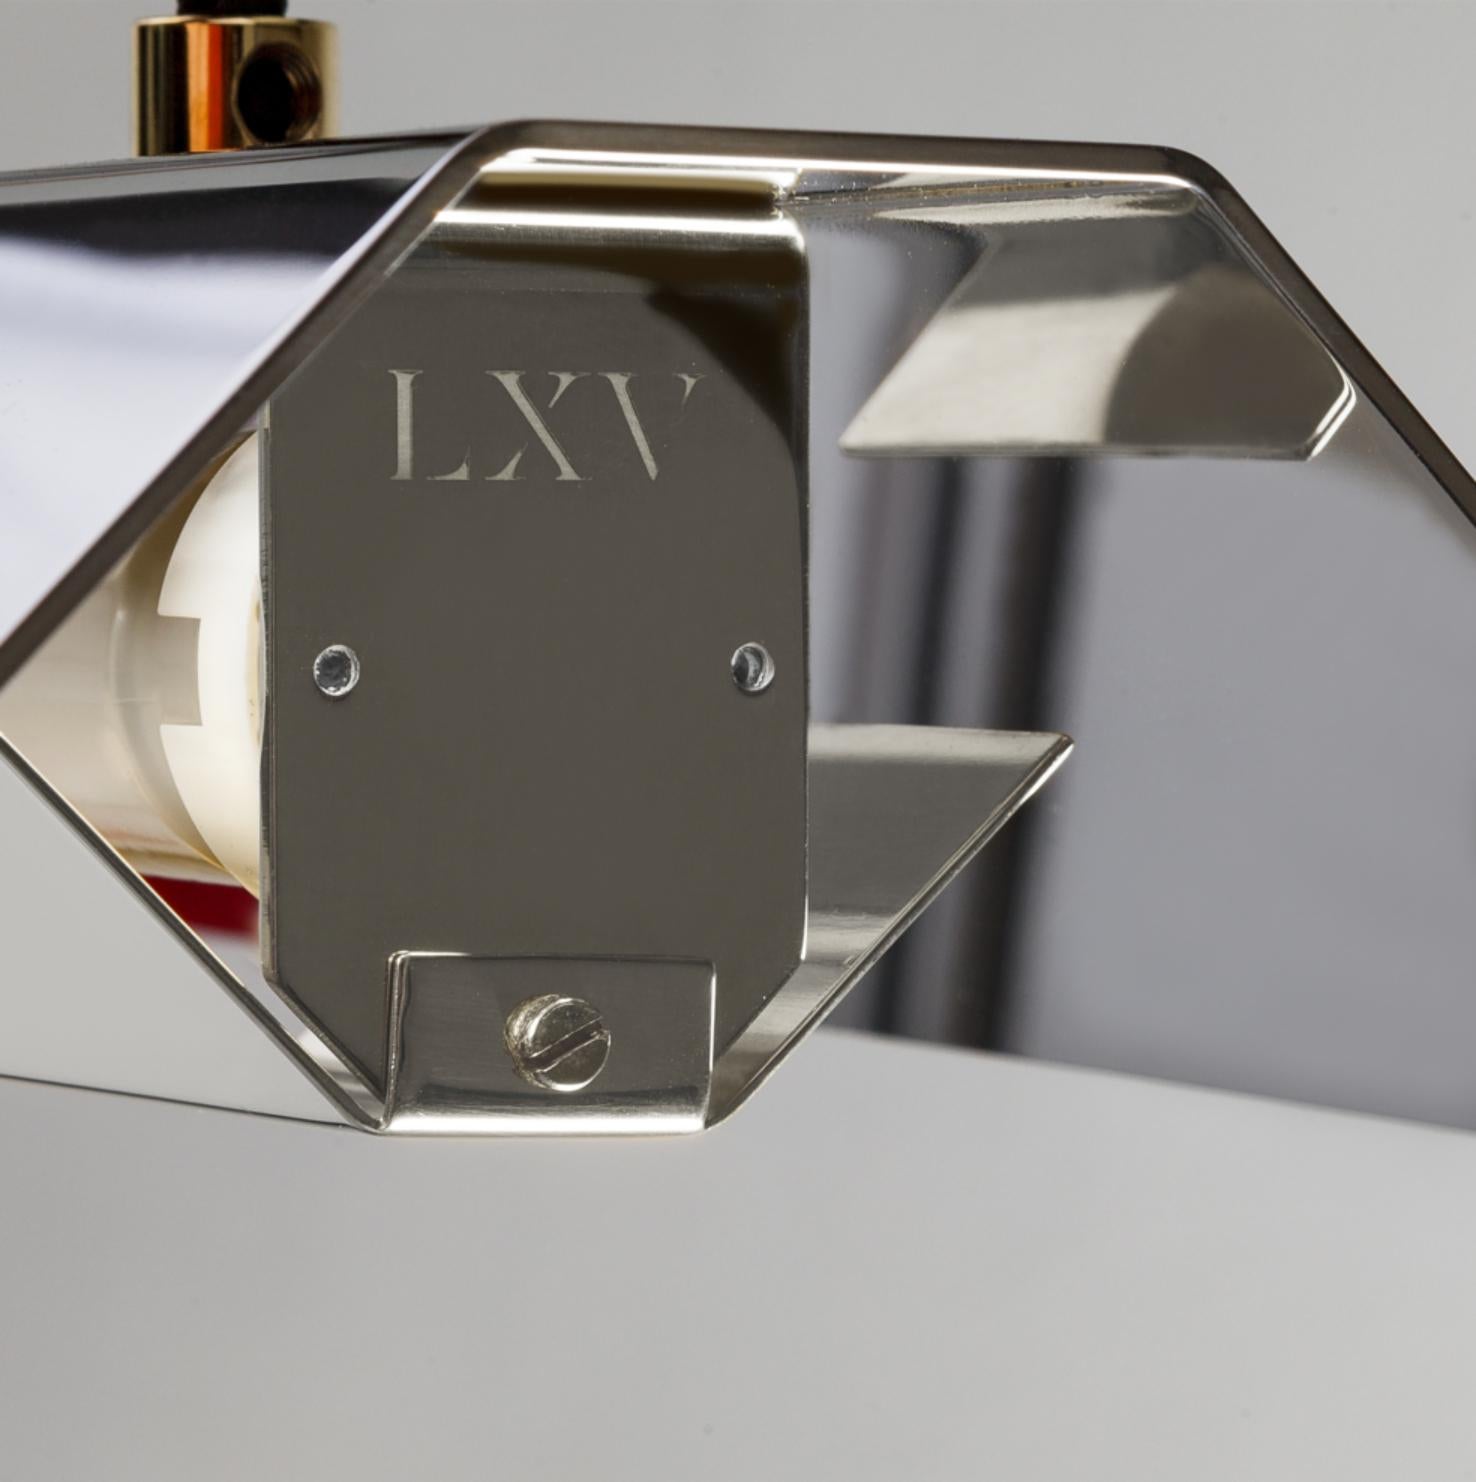 Medium Misalliance Inox suspended light by Lexavala
Dimensions: D 16 x W 100 x H 8 cm
Materials: Stainless steel.

There are two lenghts of socket covers, extending over the LED. Two short are to be found in Suspended and Surface, and one long